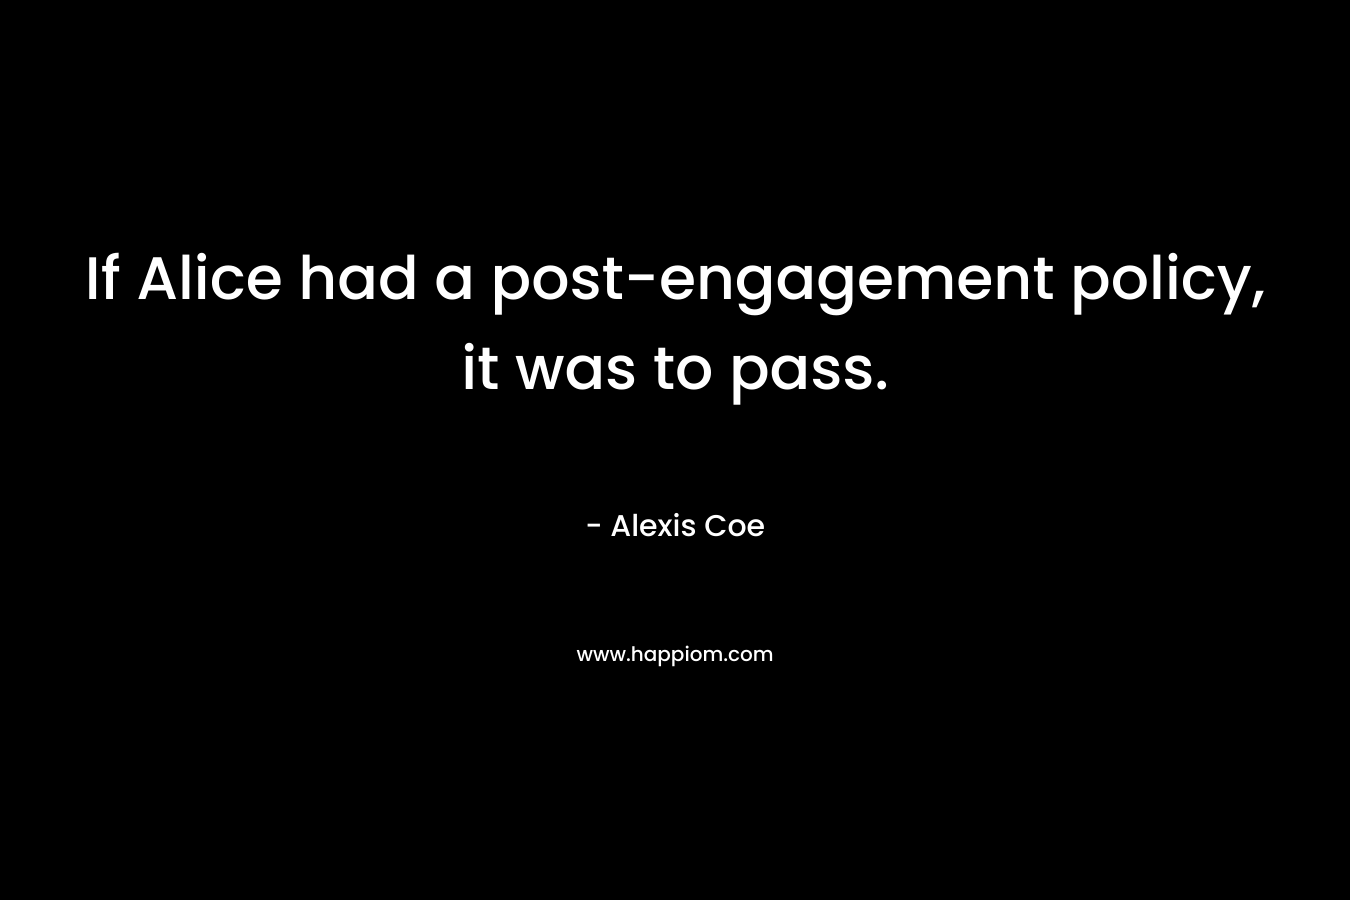 If Alice had a post-engagement policy, it was to pass. – Alexis Coe